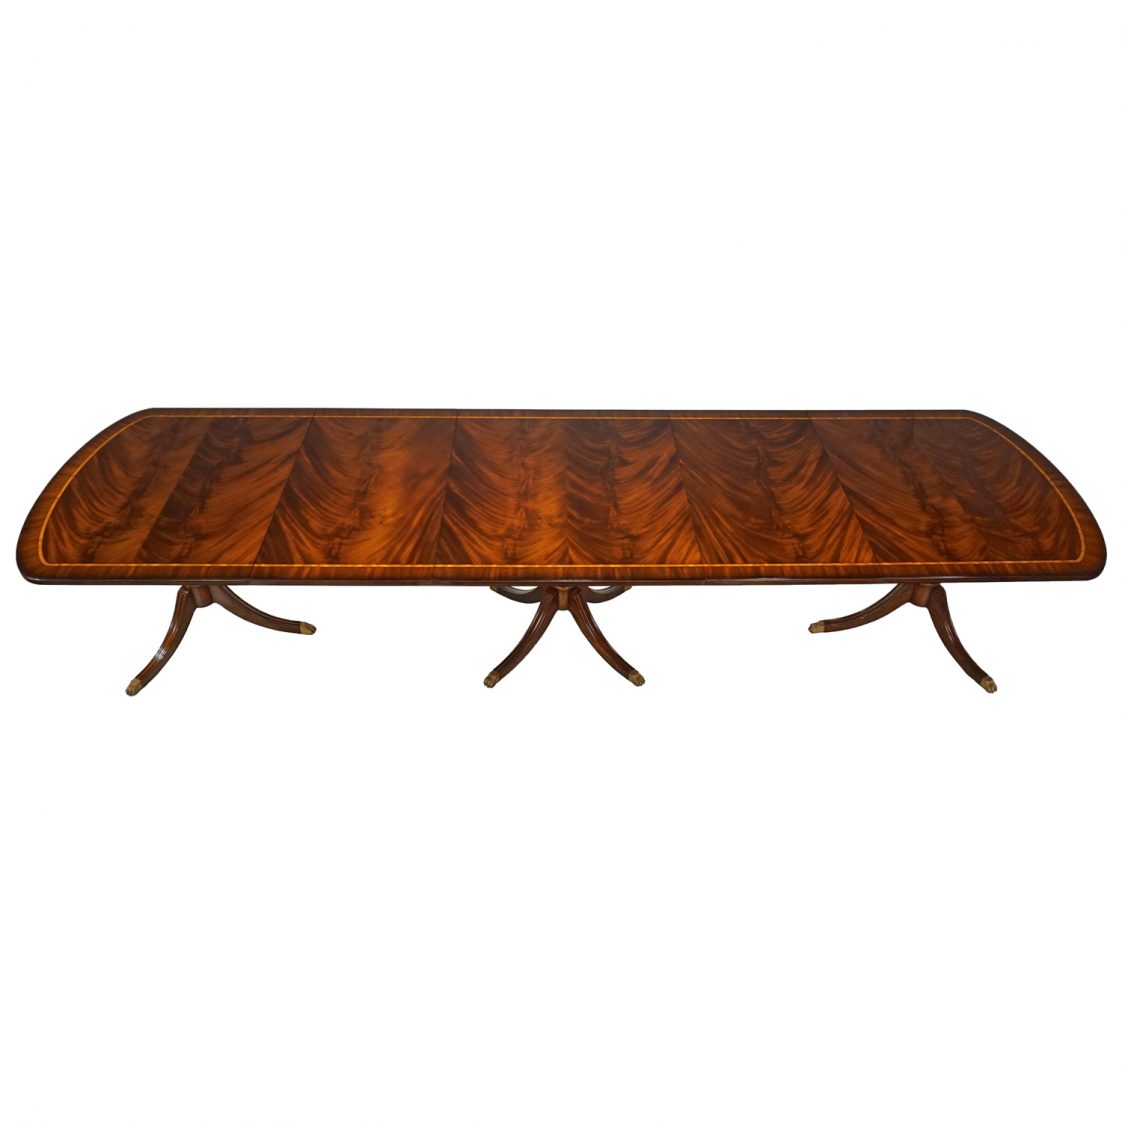 Flame wood Table Top Le Mans Triple Pedestal Dining Table